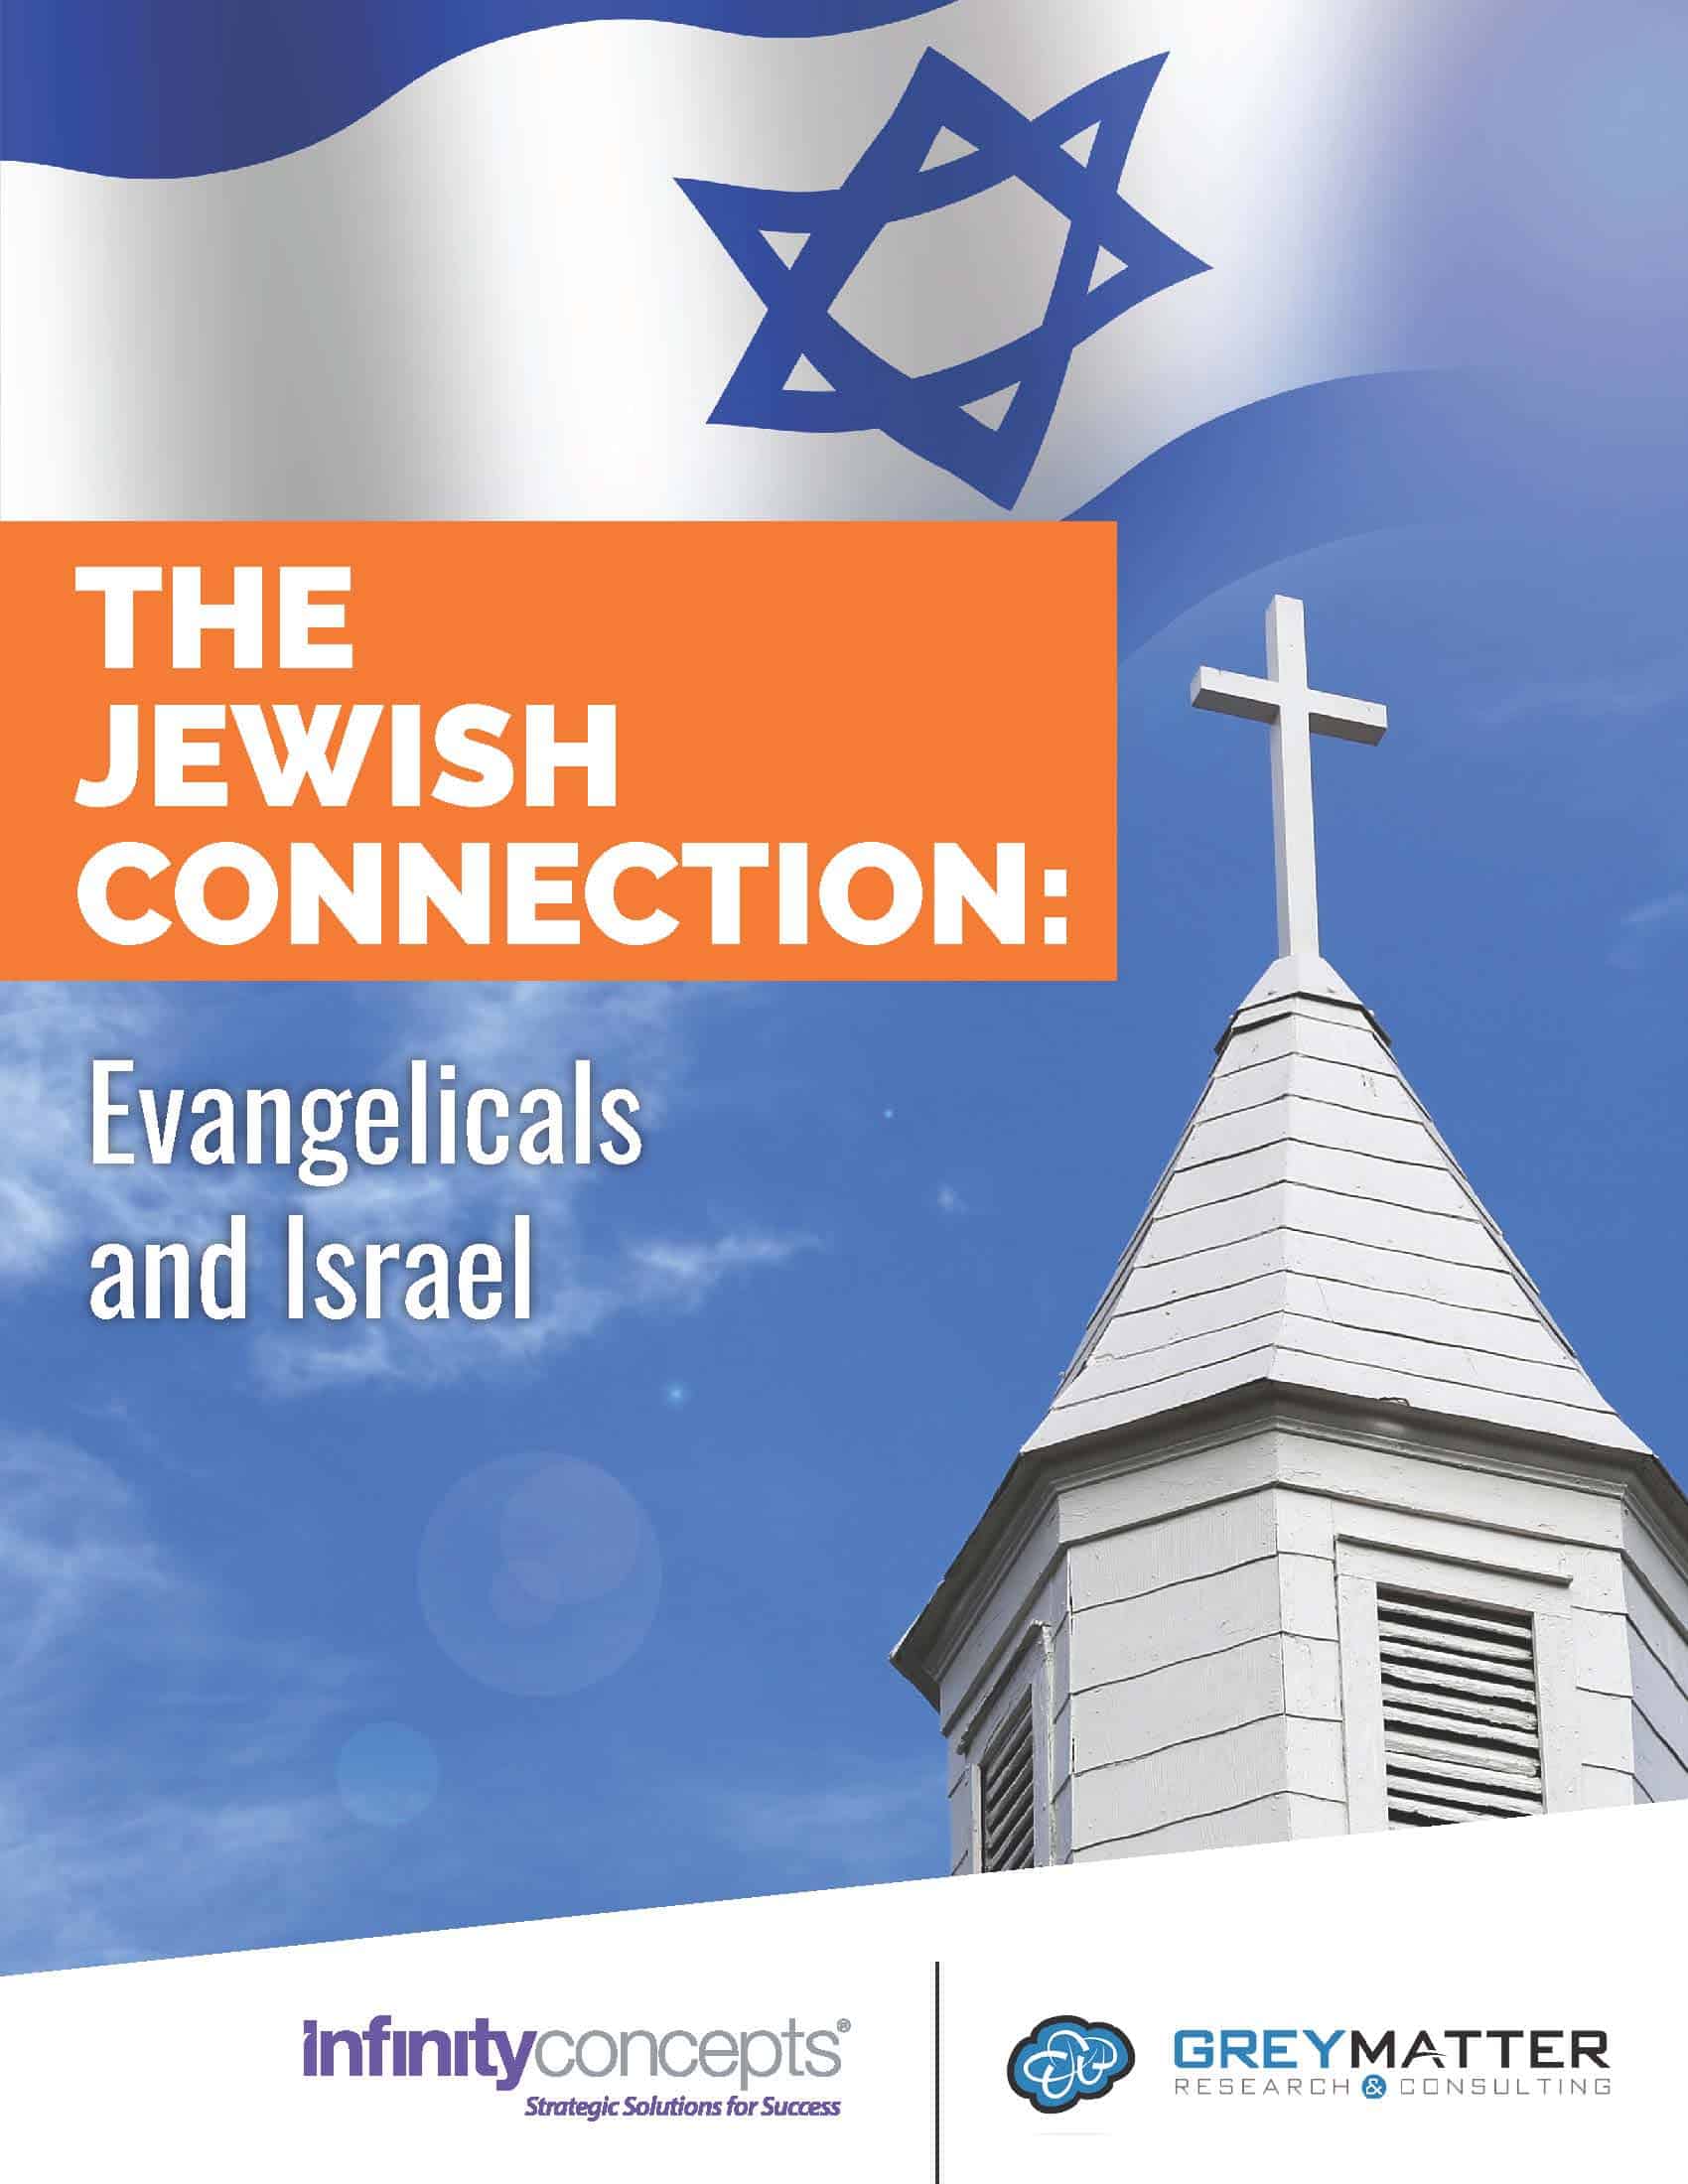 The Jewish Connection: Evangelicals and Israel